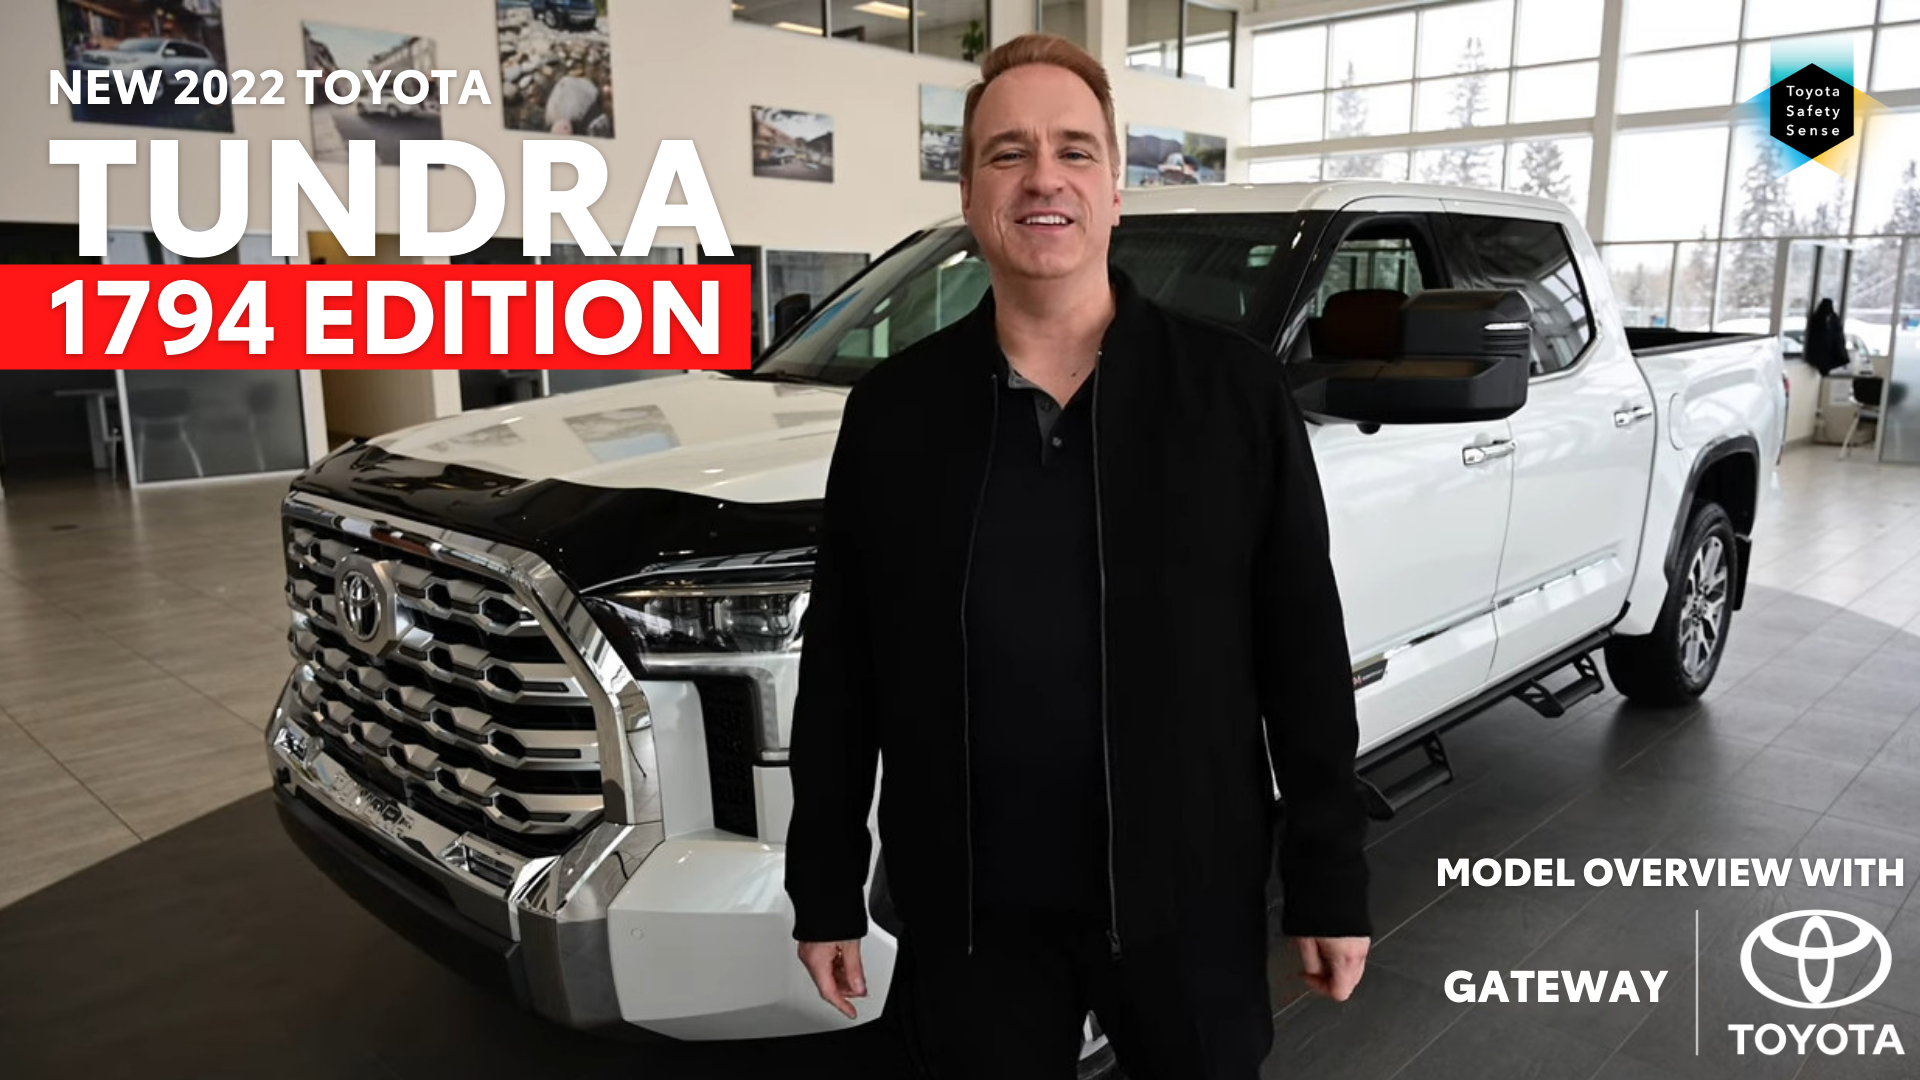 New 2022 Toyota Tundra 1794 Edition 4X4 Crewmax – Model Overview with Gateway Toyota in Edmonton, AB